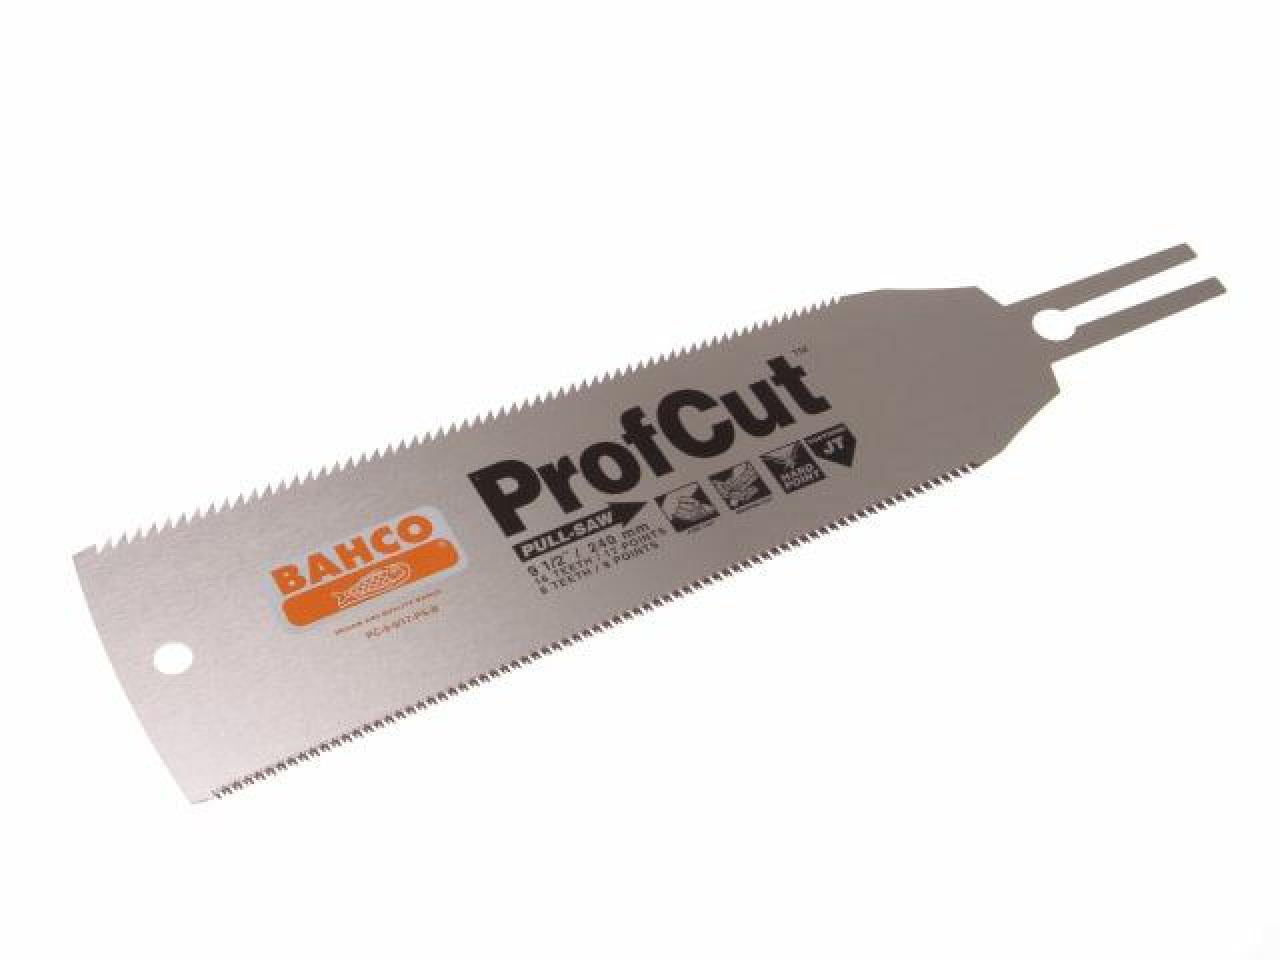 Bahco PC12-14-PS-B ProfCut Pull Saw Blade 300mm 12in 14tpi Fine BAHPC12B 